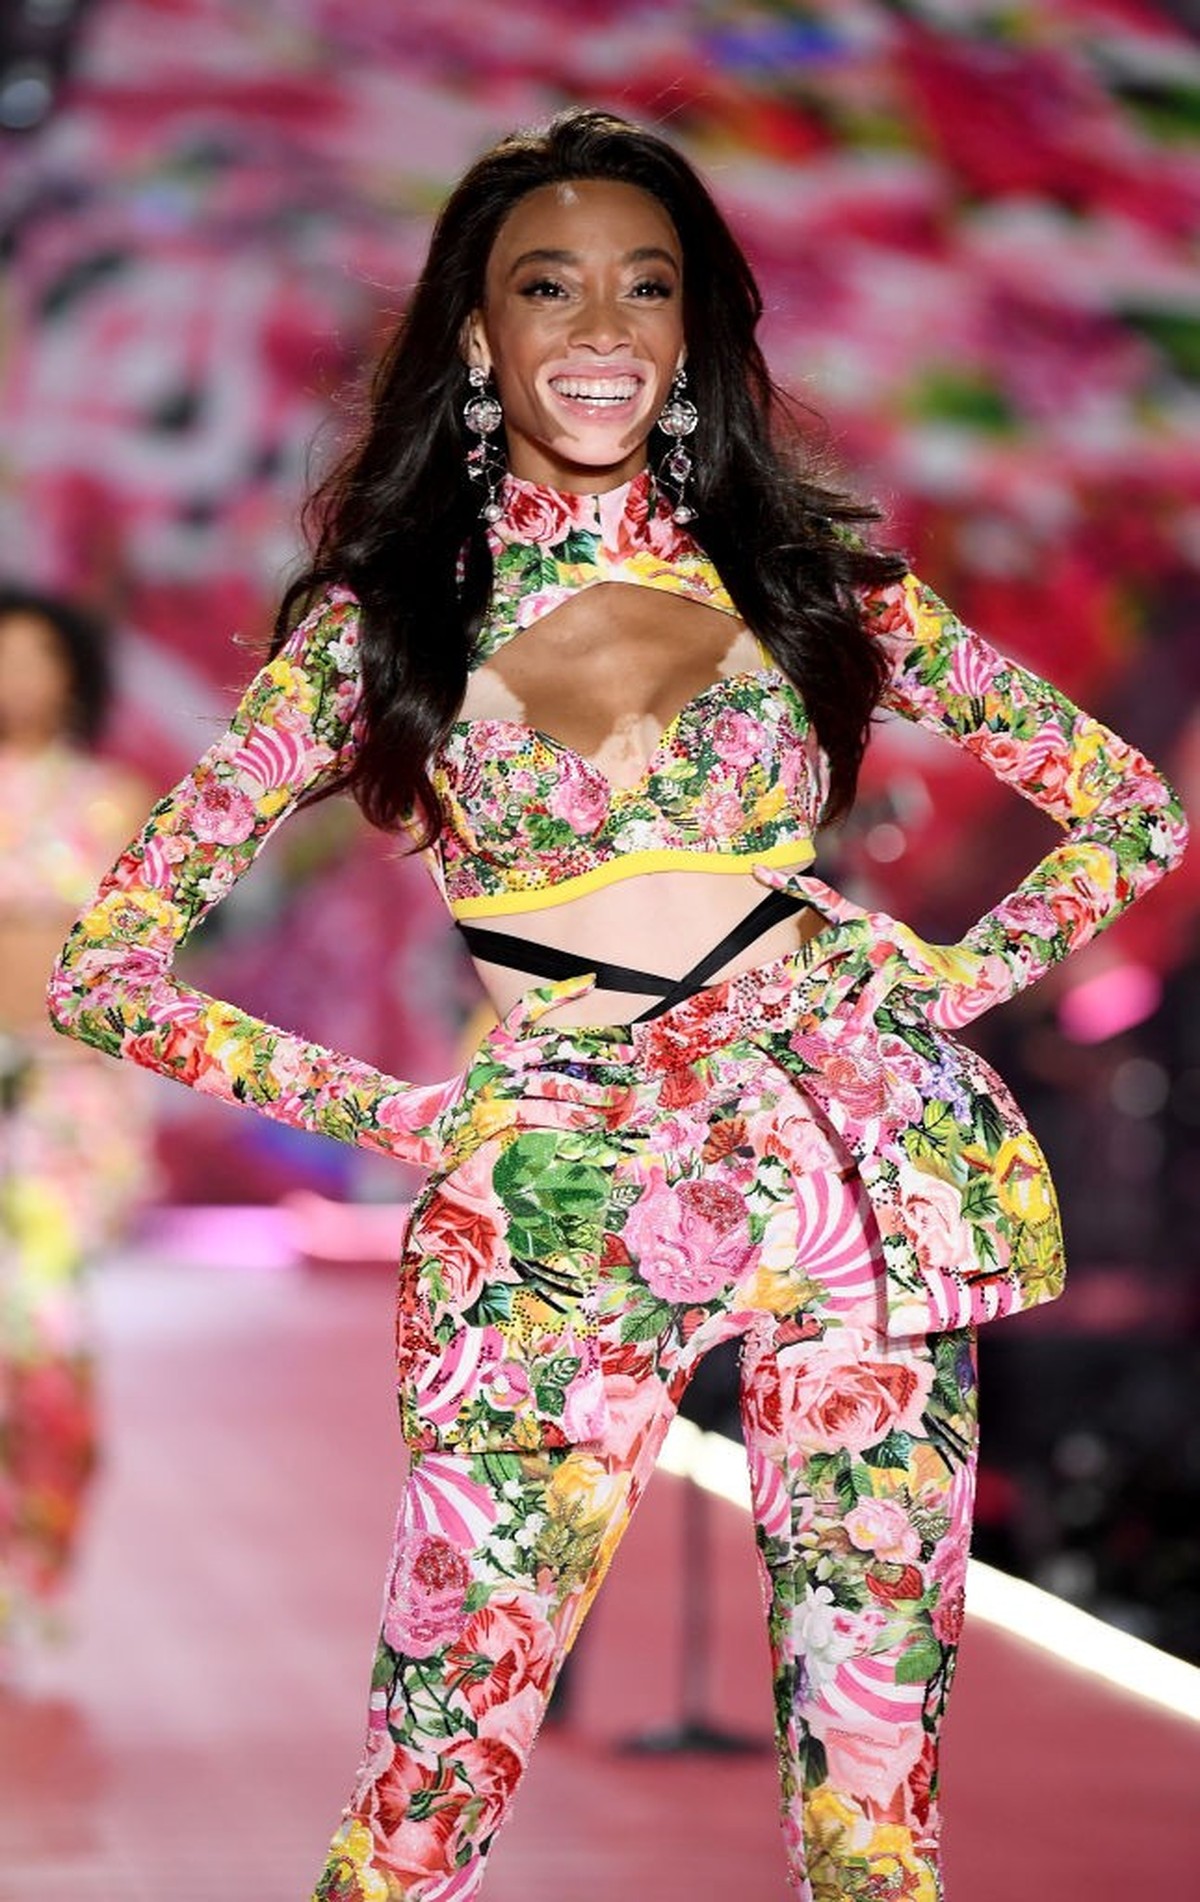 See the Victoria's Secret PINK collection of UM apparel at The M